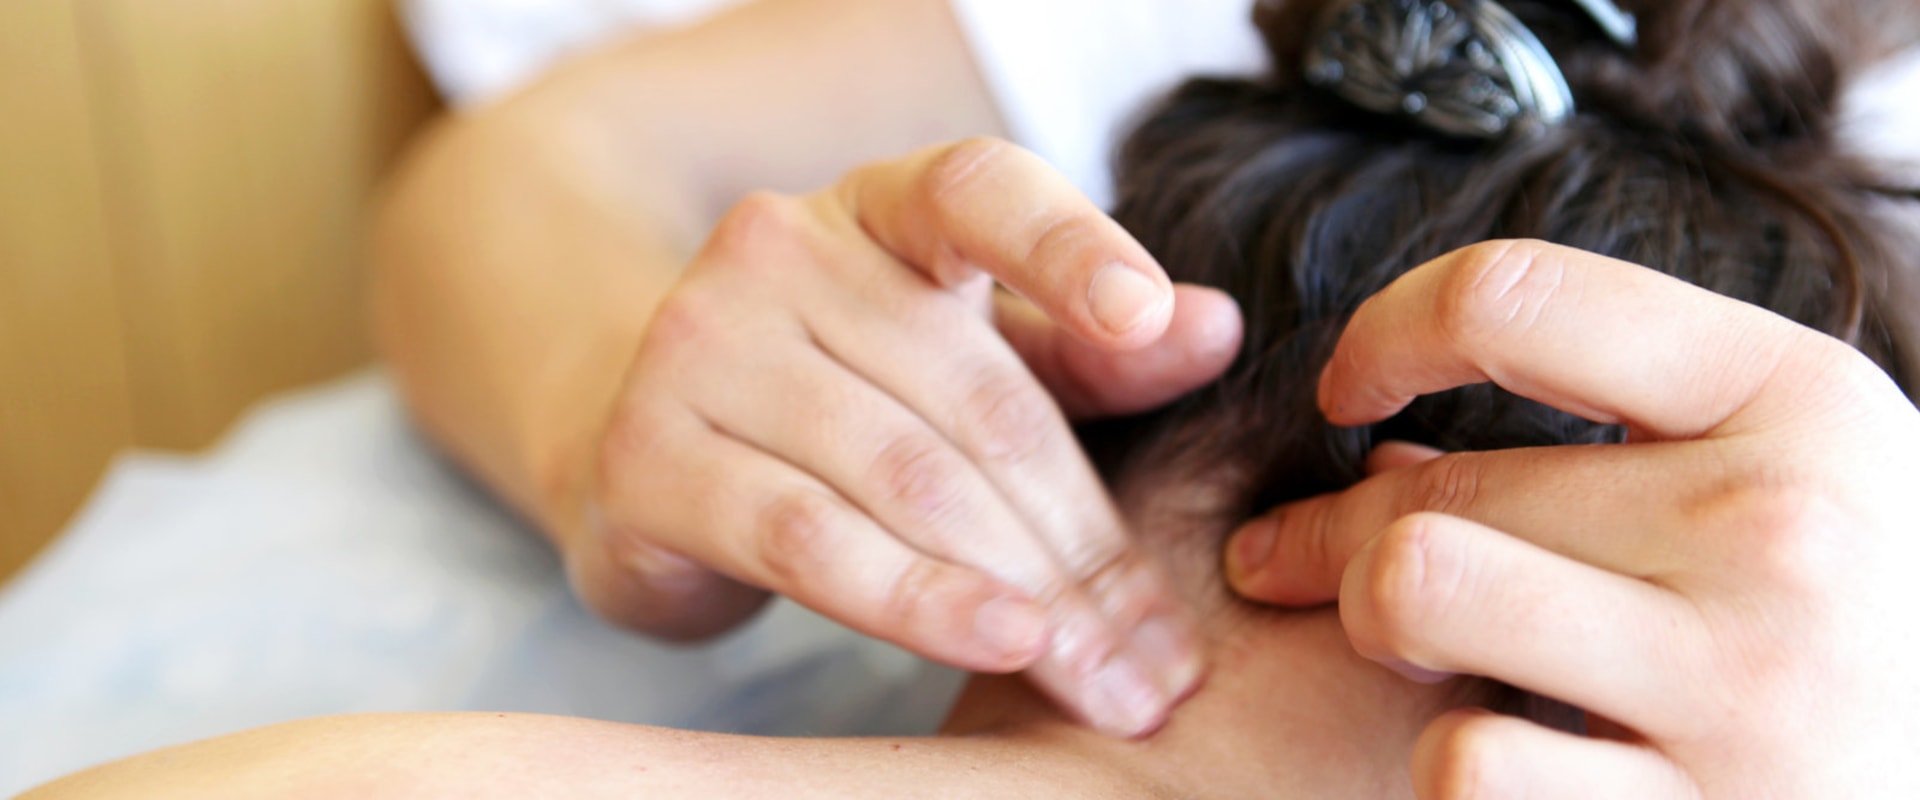 The Benefits Of Massage Therapy In Chiropractic And Kinesiology Adjustments In Panama, Florida